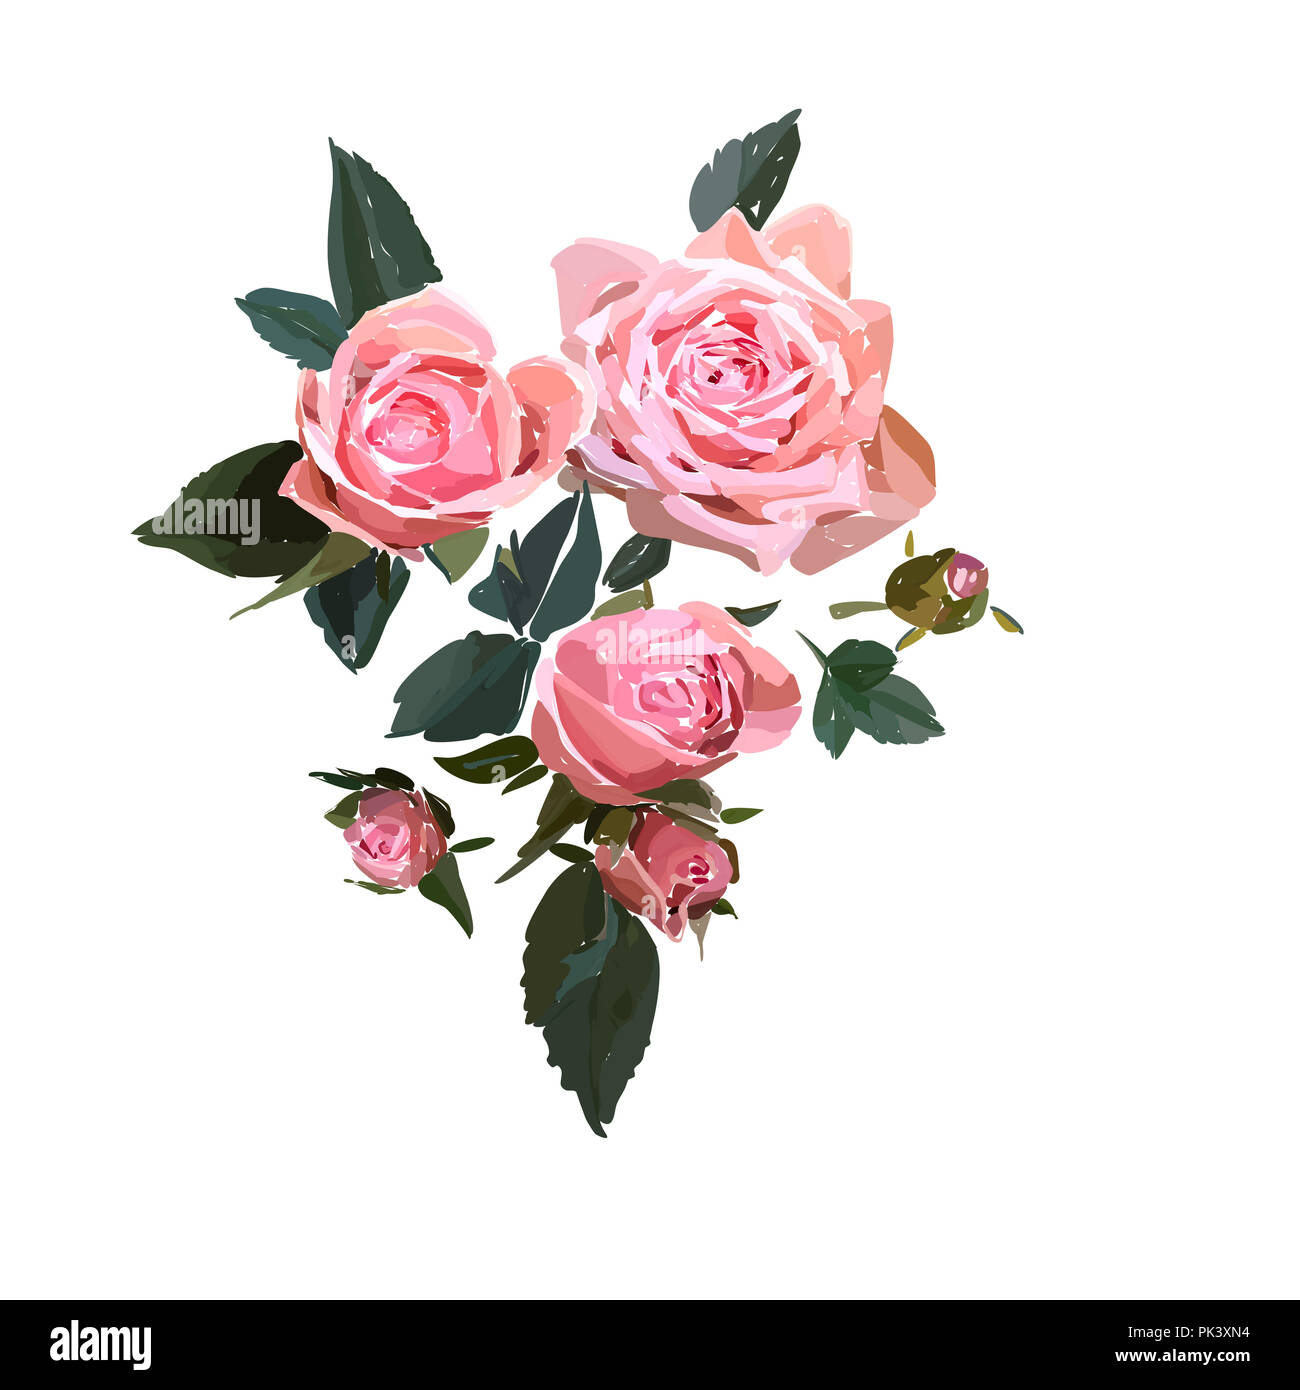 Floral design illustration. Garden flower pink rose isolated on white  background. Elegant bouquet print in rustic style. Wedding invitation card  templ Stock Photo - Alamy